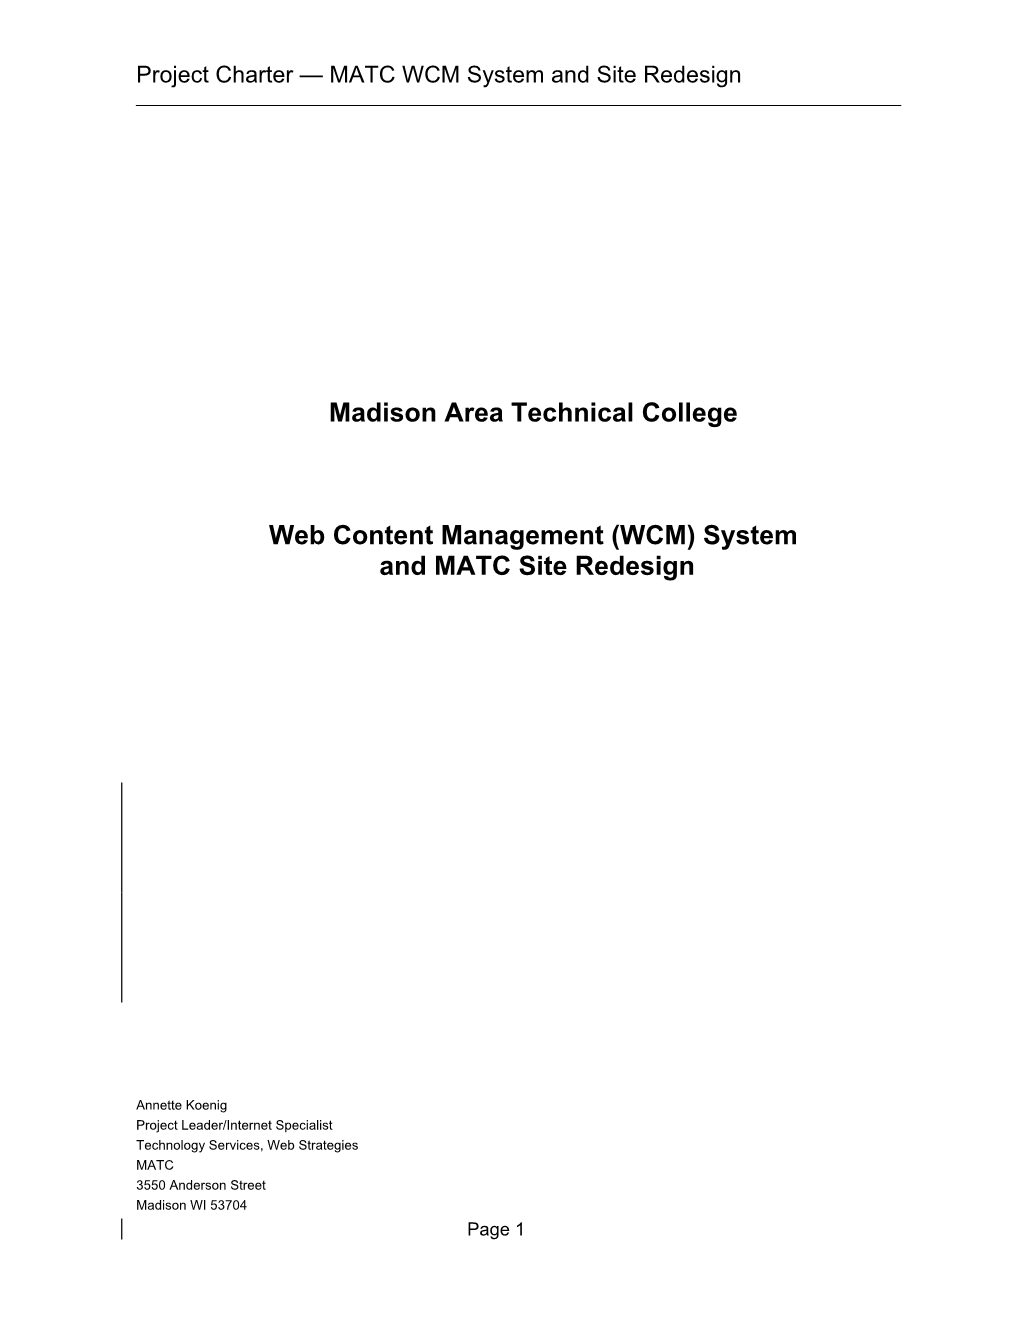 Web Content Management (WCM) System and MATC Site Redesign